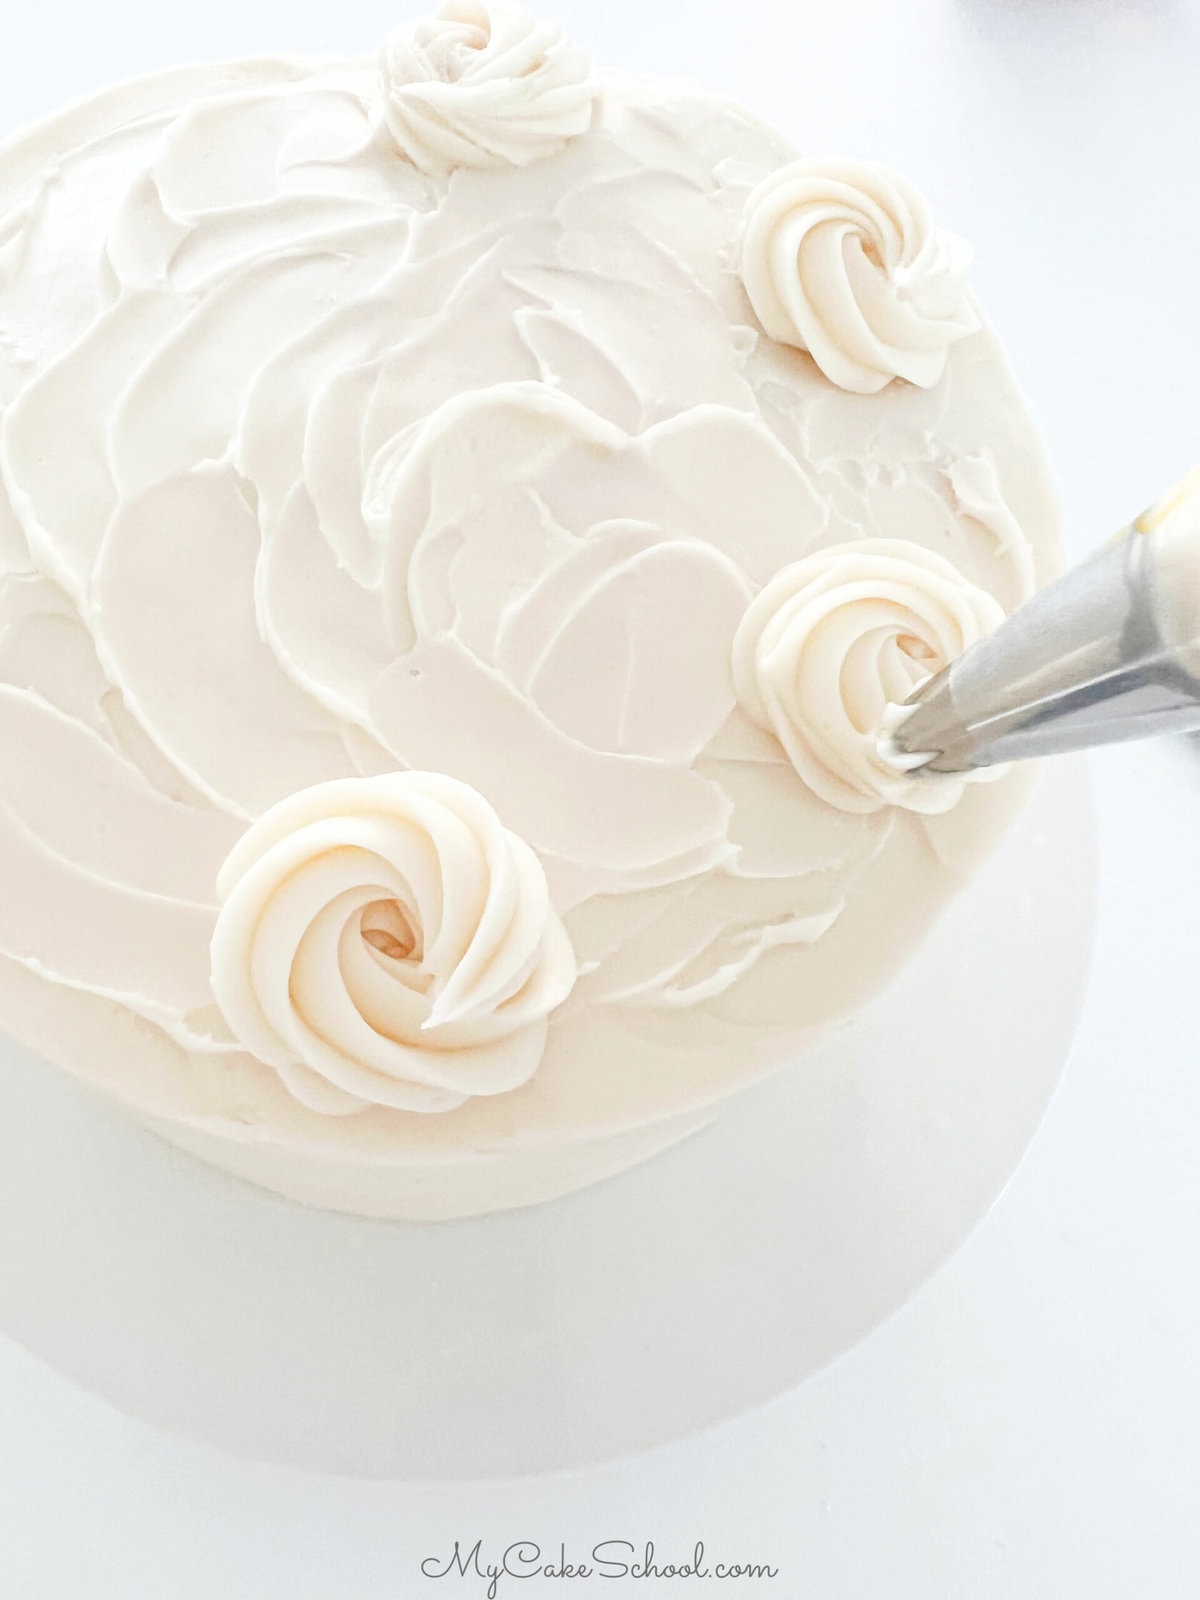 Adding texture to the frosted cake with offset spatula